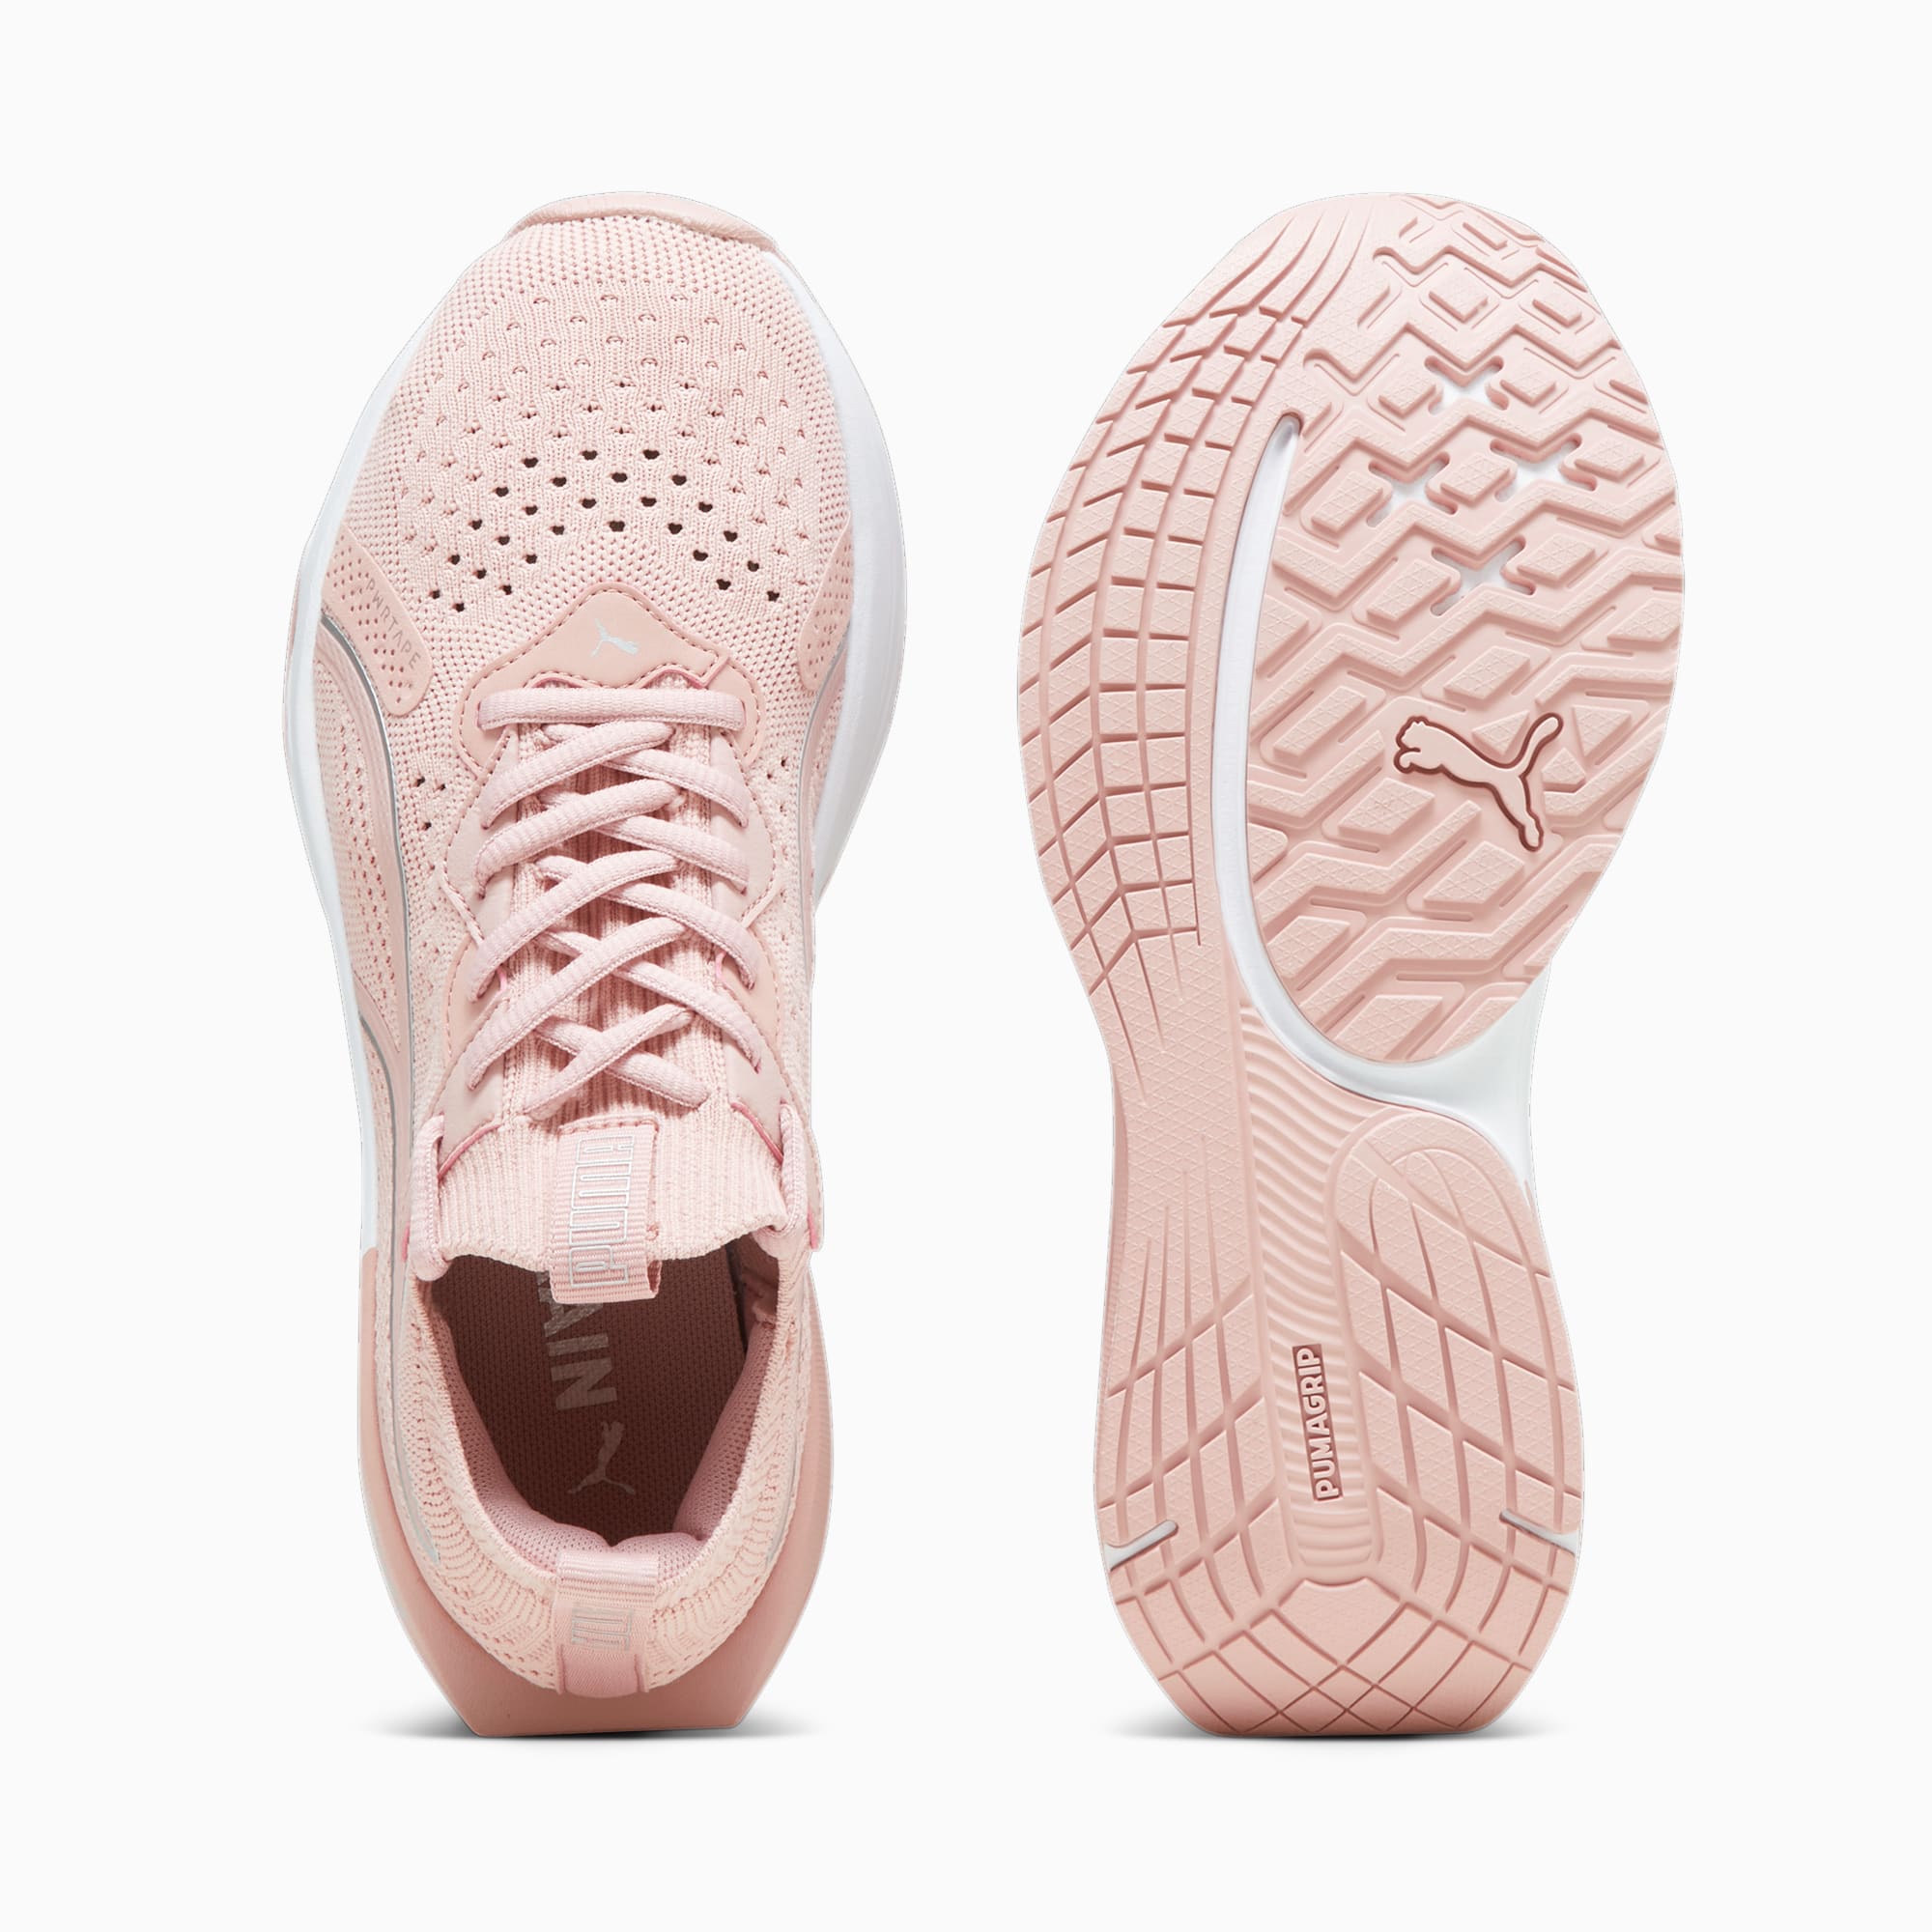 PUMA Pwr Xx Nitro Luxe Training Shoes Women, Future Pink/White/Silver, Size 35,5, Shoes